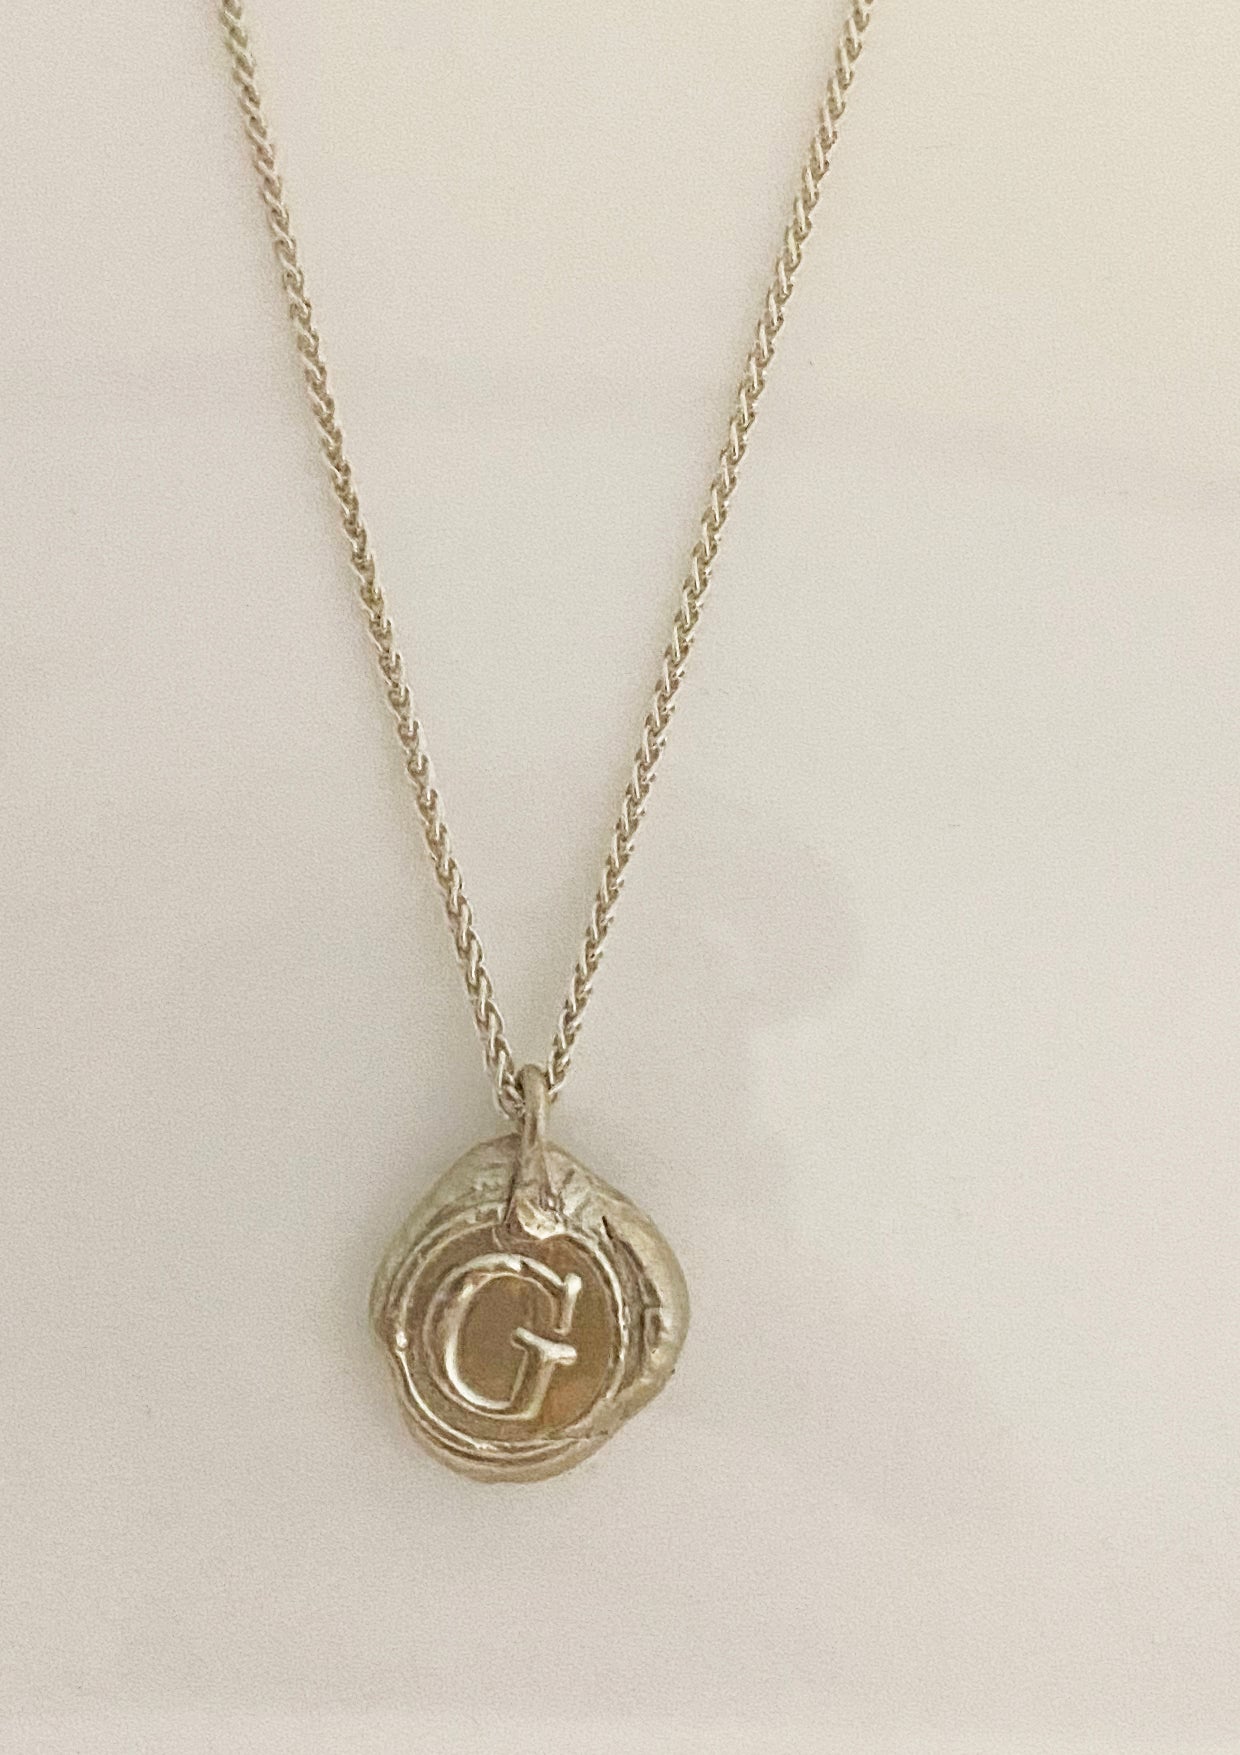 Personalised necklace - 75cm chain length